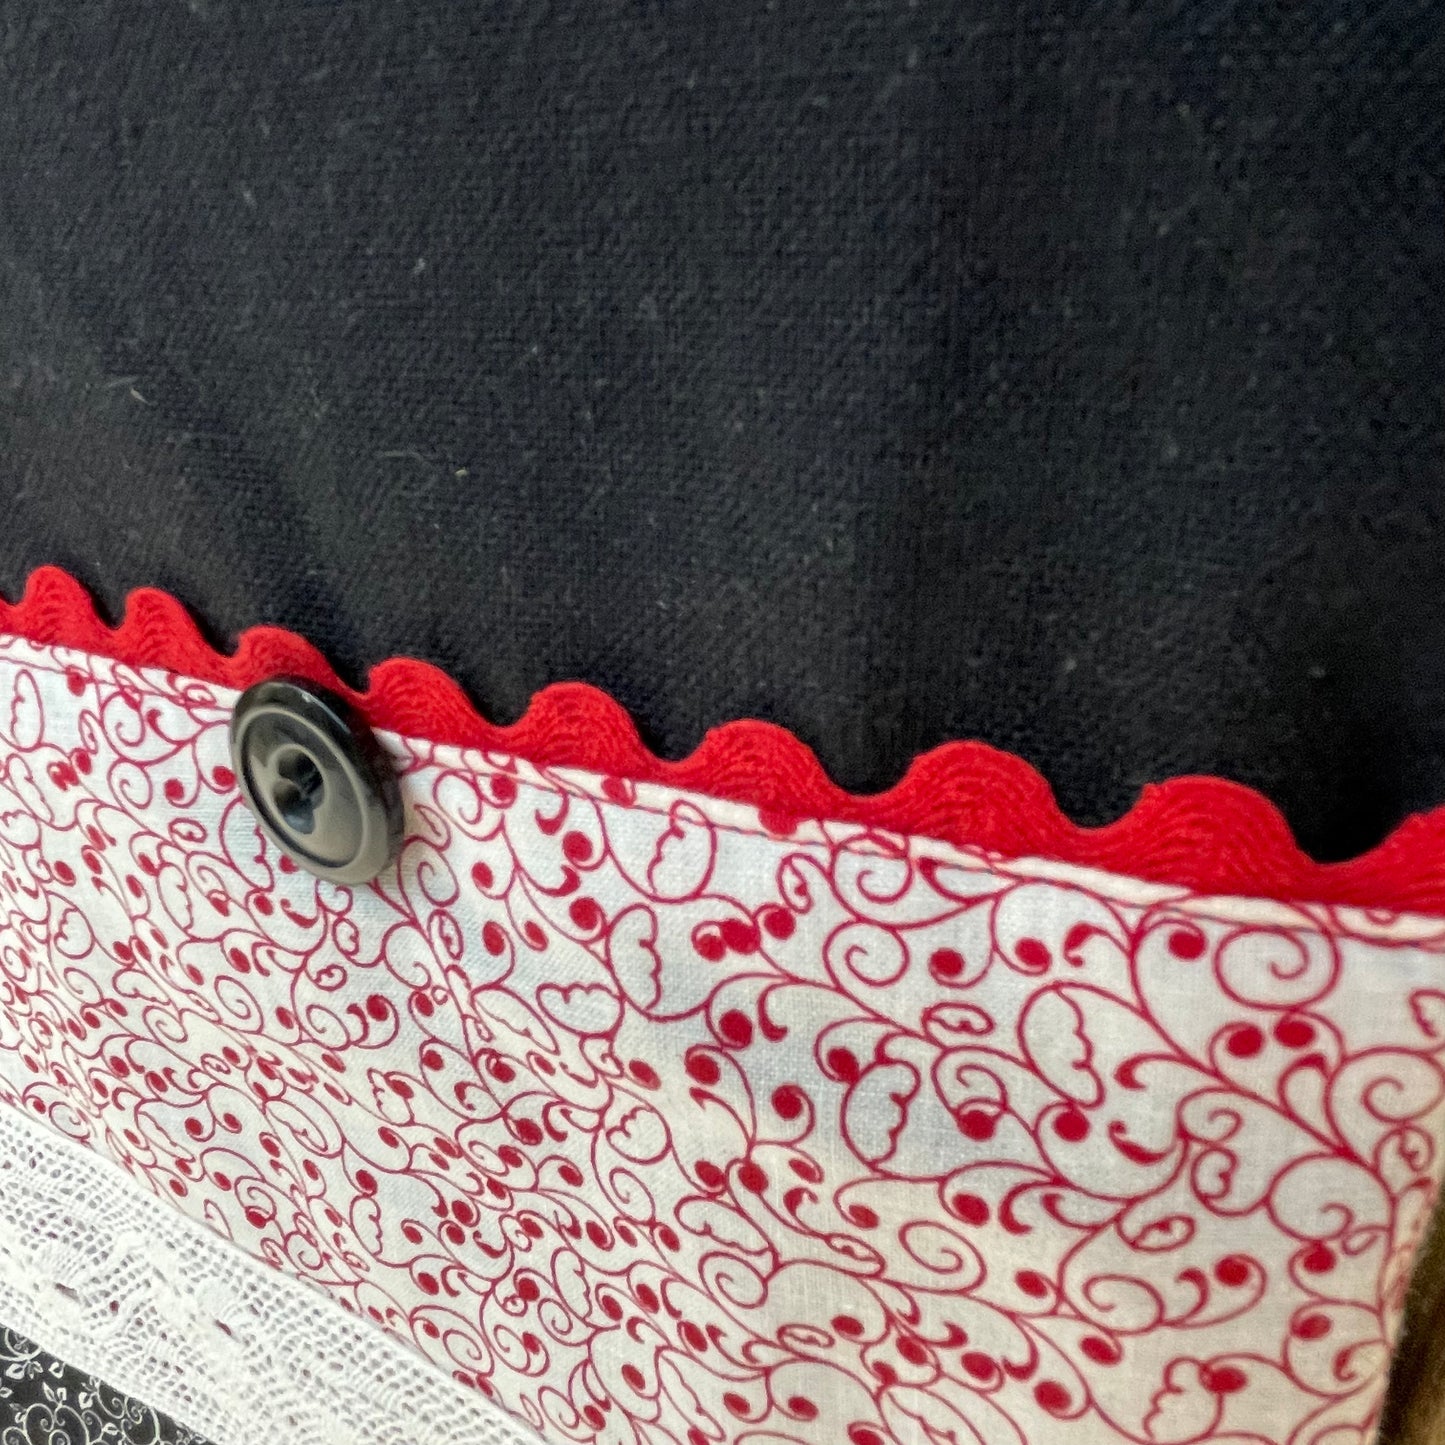 Farmhouse dish towel. Black cotton toweling with quilting cotton accents. Featuring red Ric Rac, wide white polyester lace and button embellishments. Part of a mix and match farmhemian home accents decor line. Browse all the collections online. And be sure to tune into the Home Stitchery Decor YouTube Channel for fabulous fun farmhouse DIY Decor tutorials.